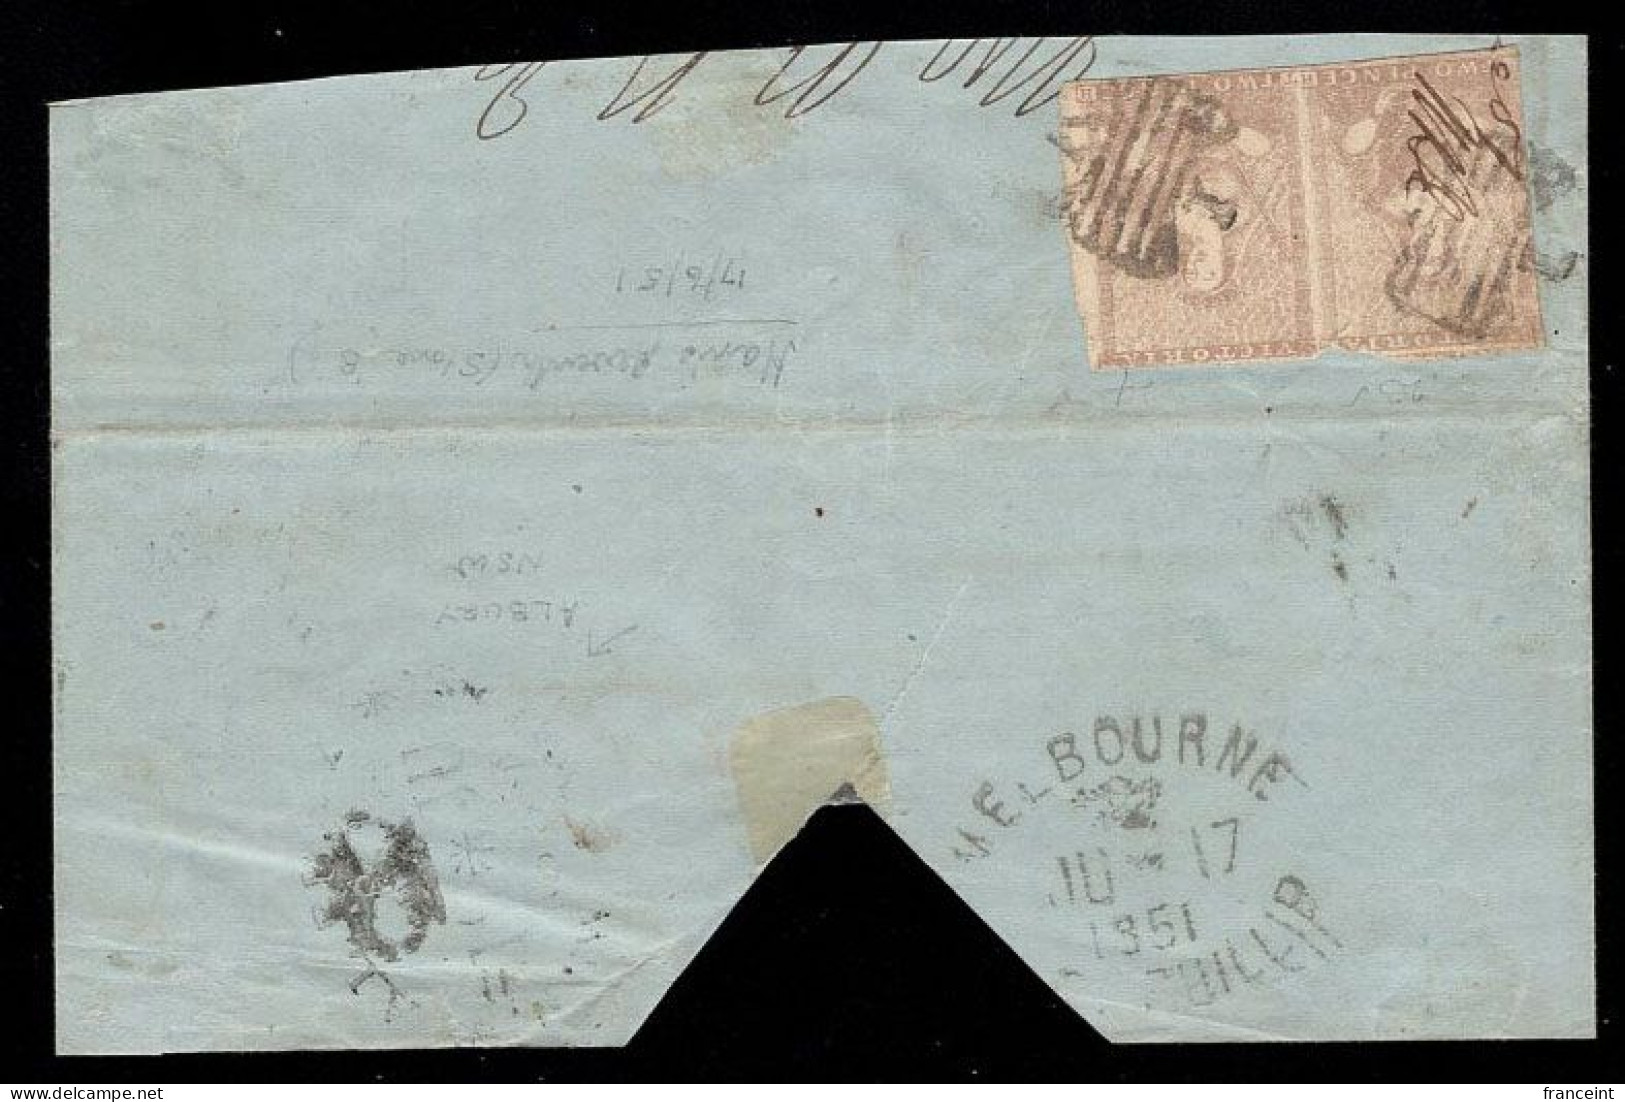 VICTORIA(1851) Butterfly Fancy Cancel In Black On Pair Of Scott No 7A On Envelope Front. Rare Exhibit Item! - Briefe U. Dokumente